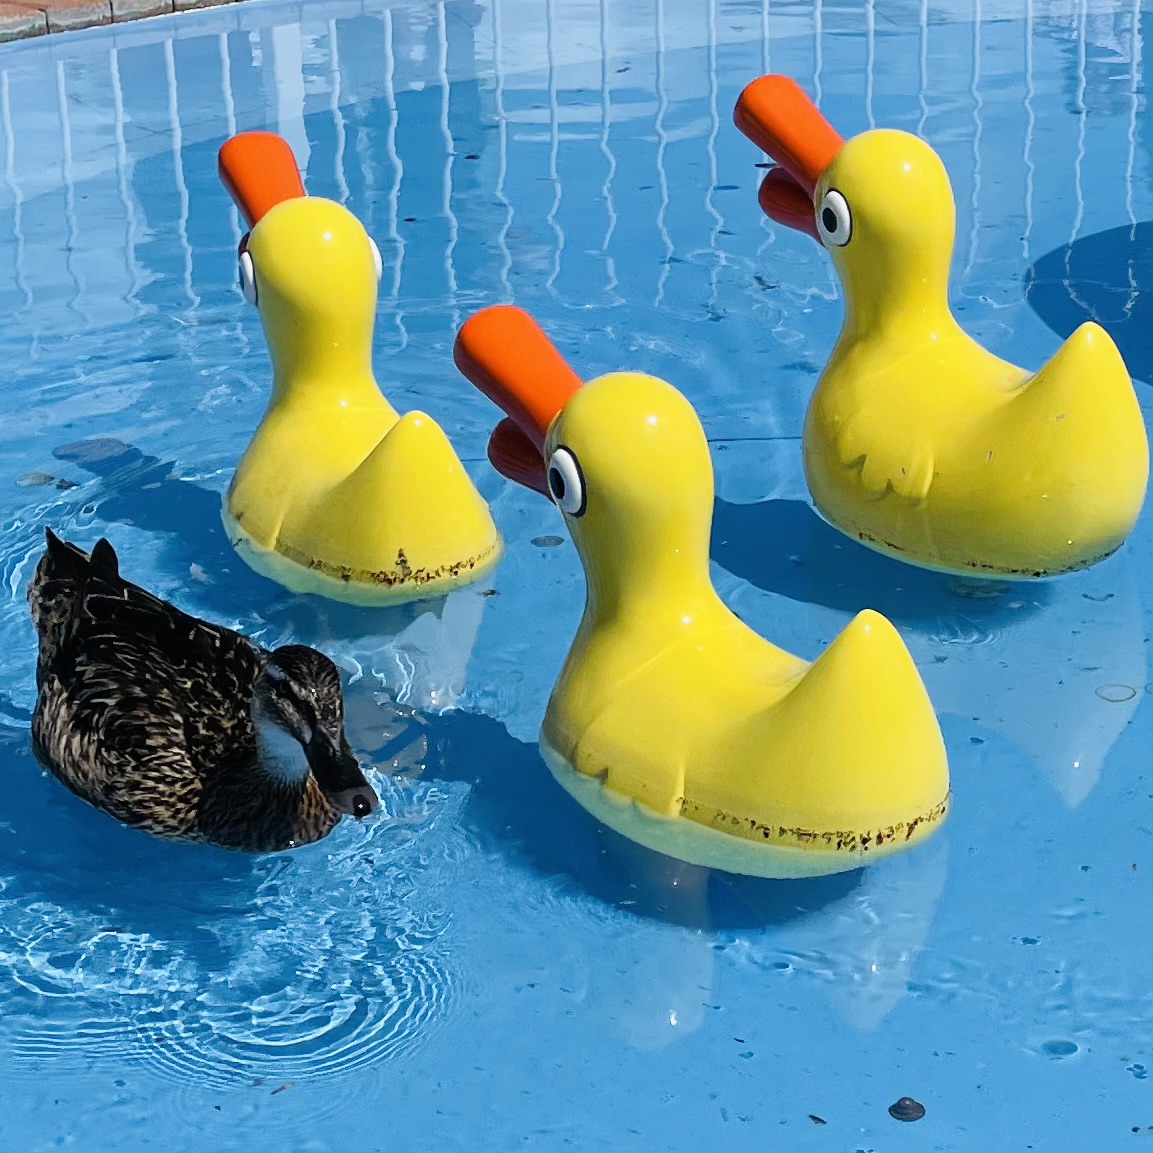 Rubber ducks and a live duck from Matthew in the UK